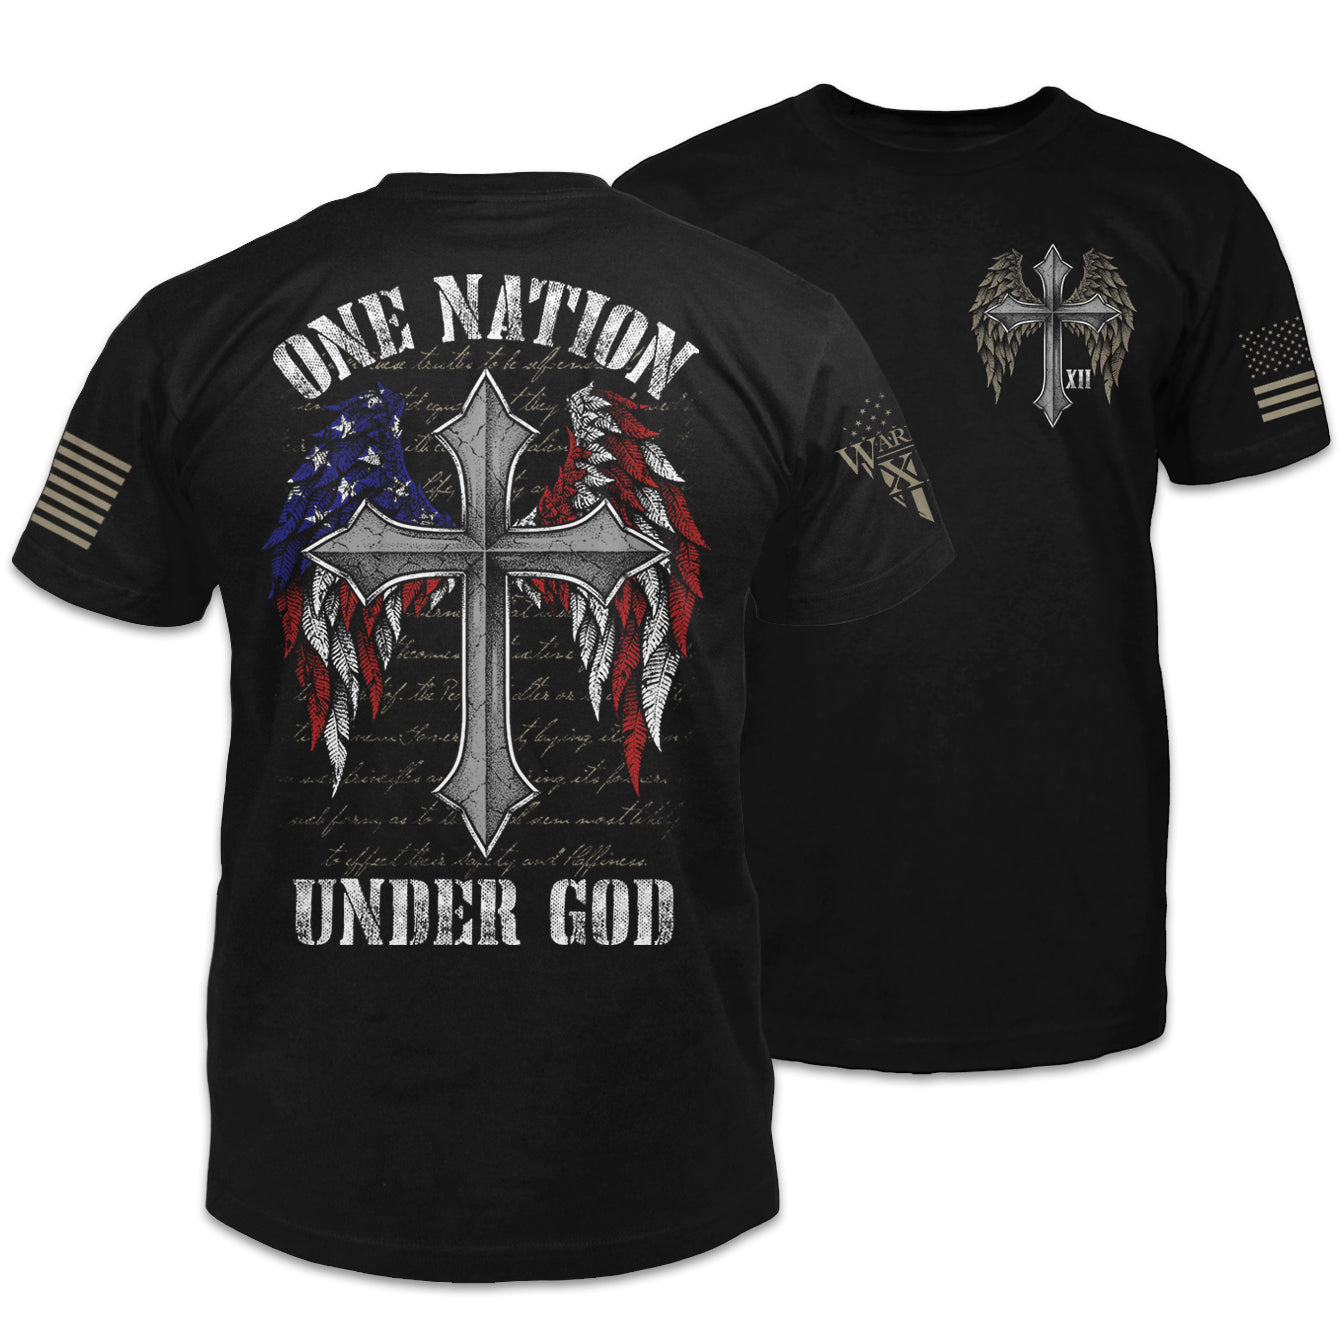 Front & back black t-shirt with the words " one nation under God" with a cross with USA Flag wings printed on the shirt.